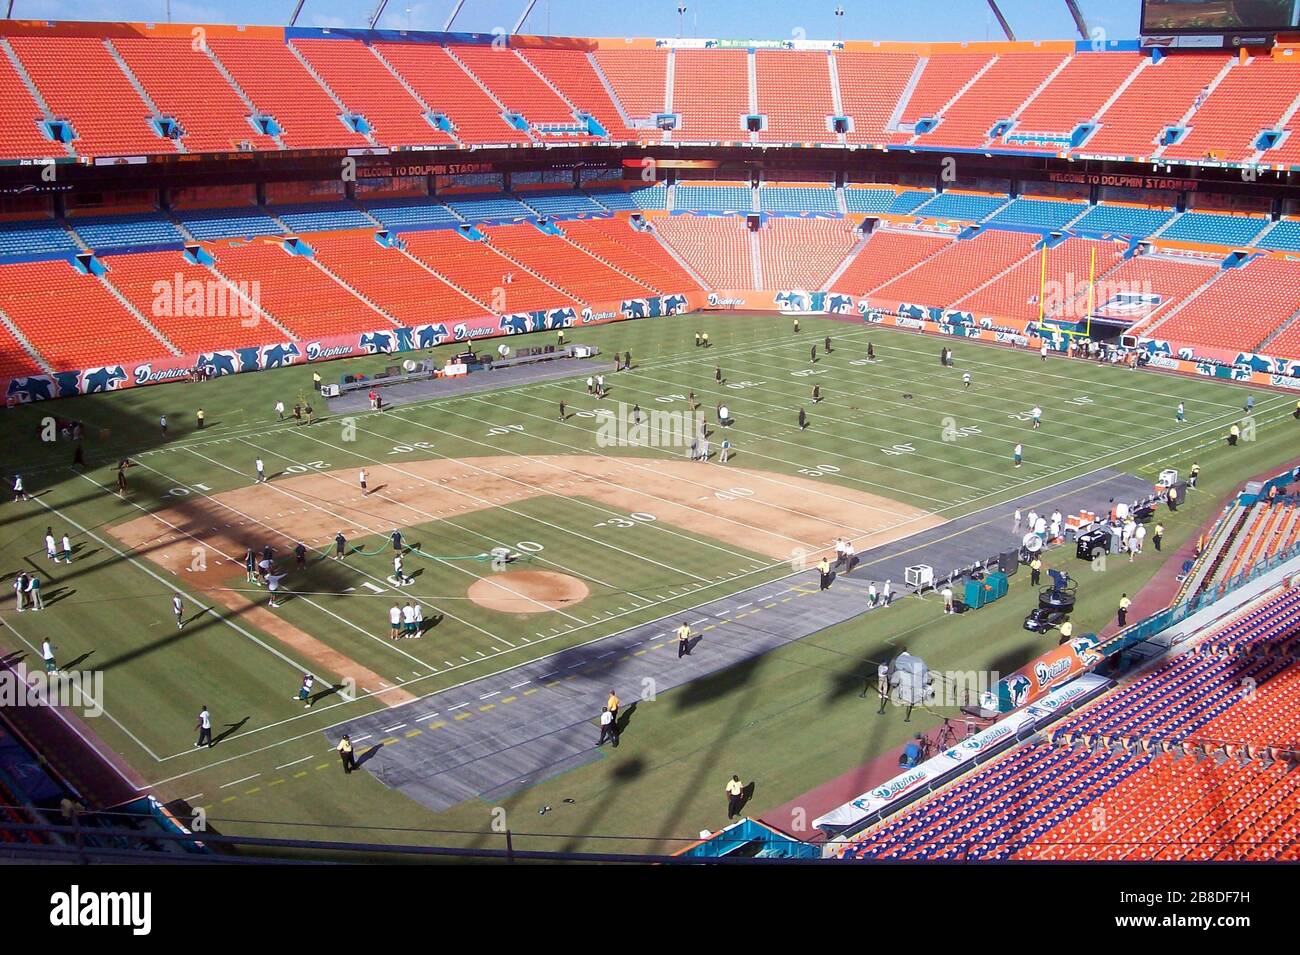 Interior of Dolphin Stadium, football configuration, with the baseball  diamond dirt.; 13 August 2007 (original upload date); Transferred from en. wikipedia to Commons.; AdamFirst at English Wikipedia Stock Photo - Alamy